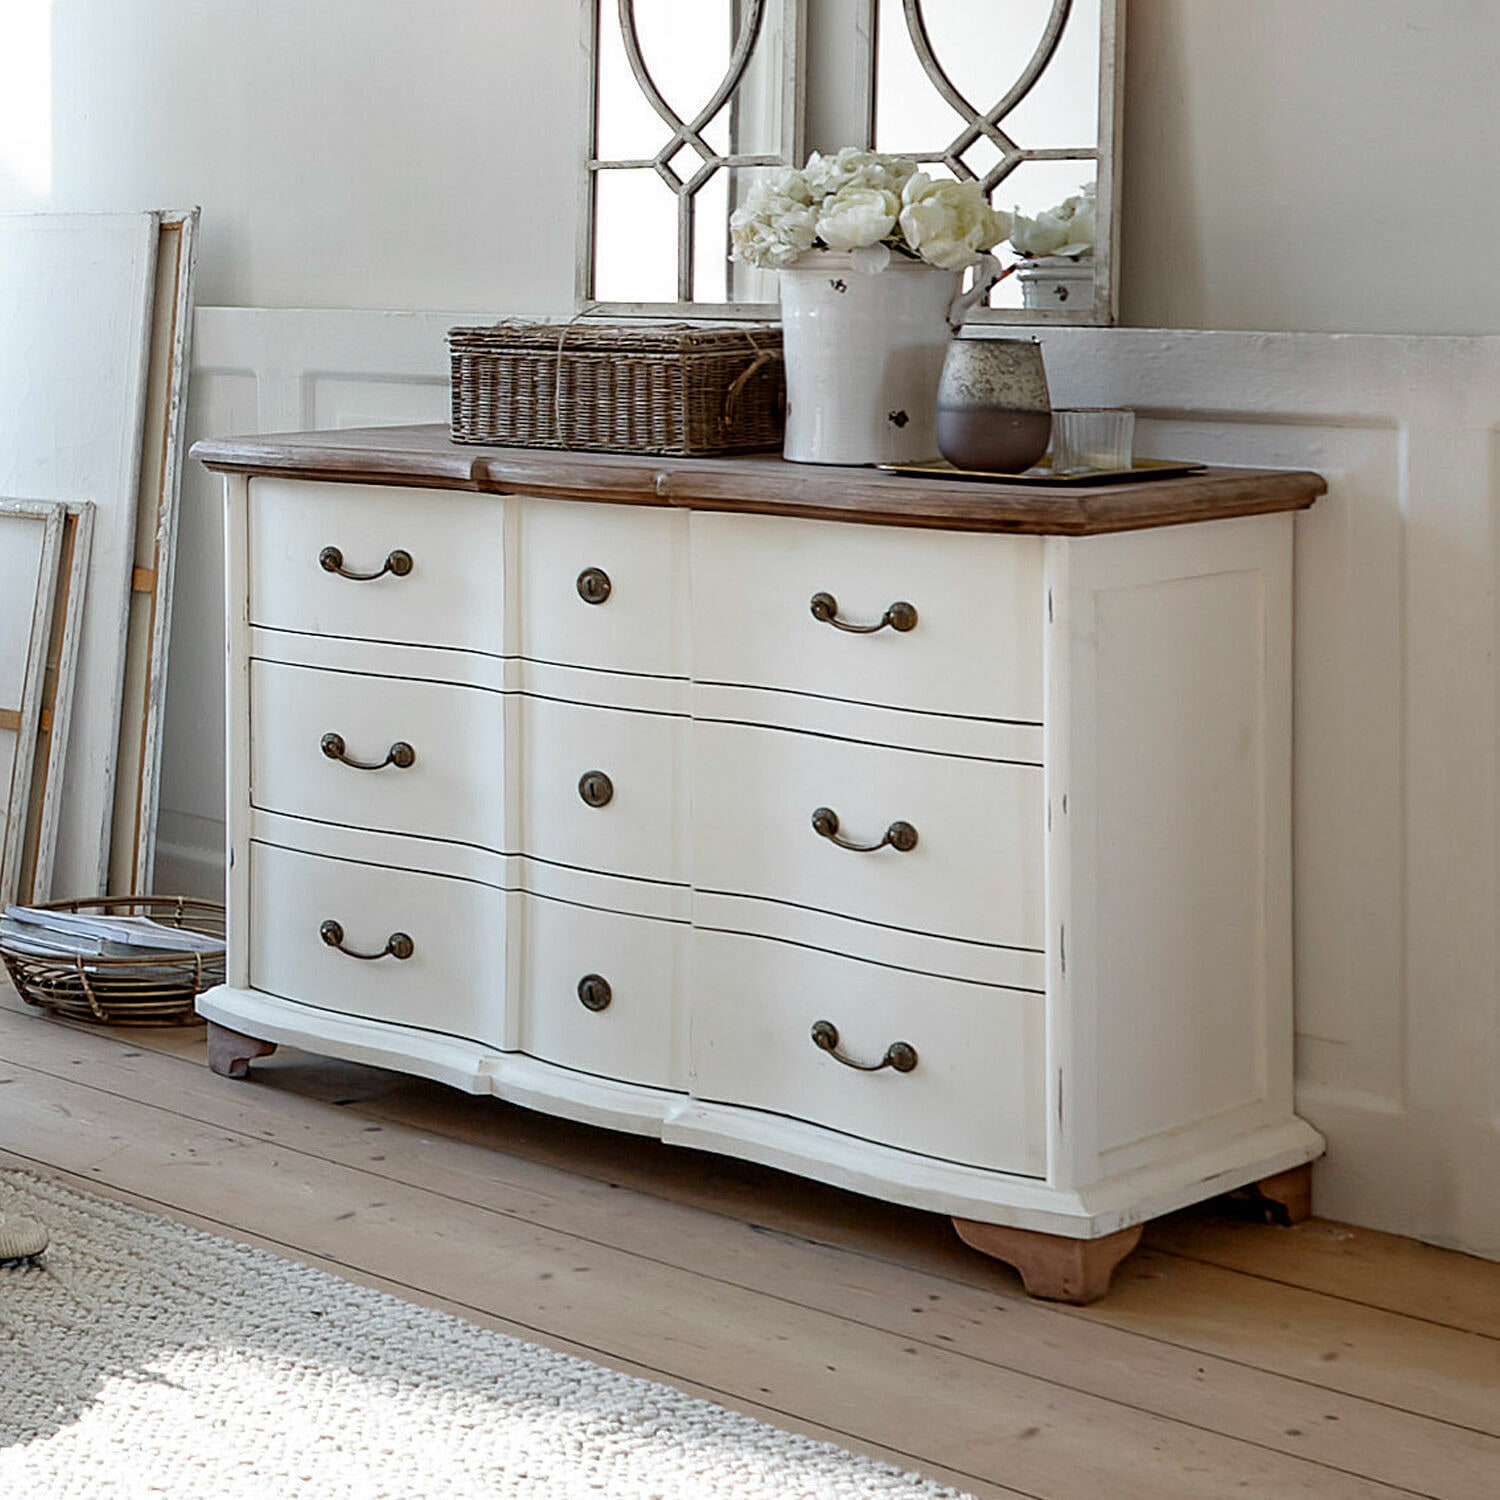 The Chest Of Drawers And The Period Wardrobe, Basics Of The Gustavian Interior 